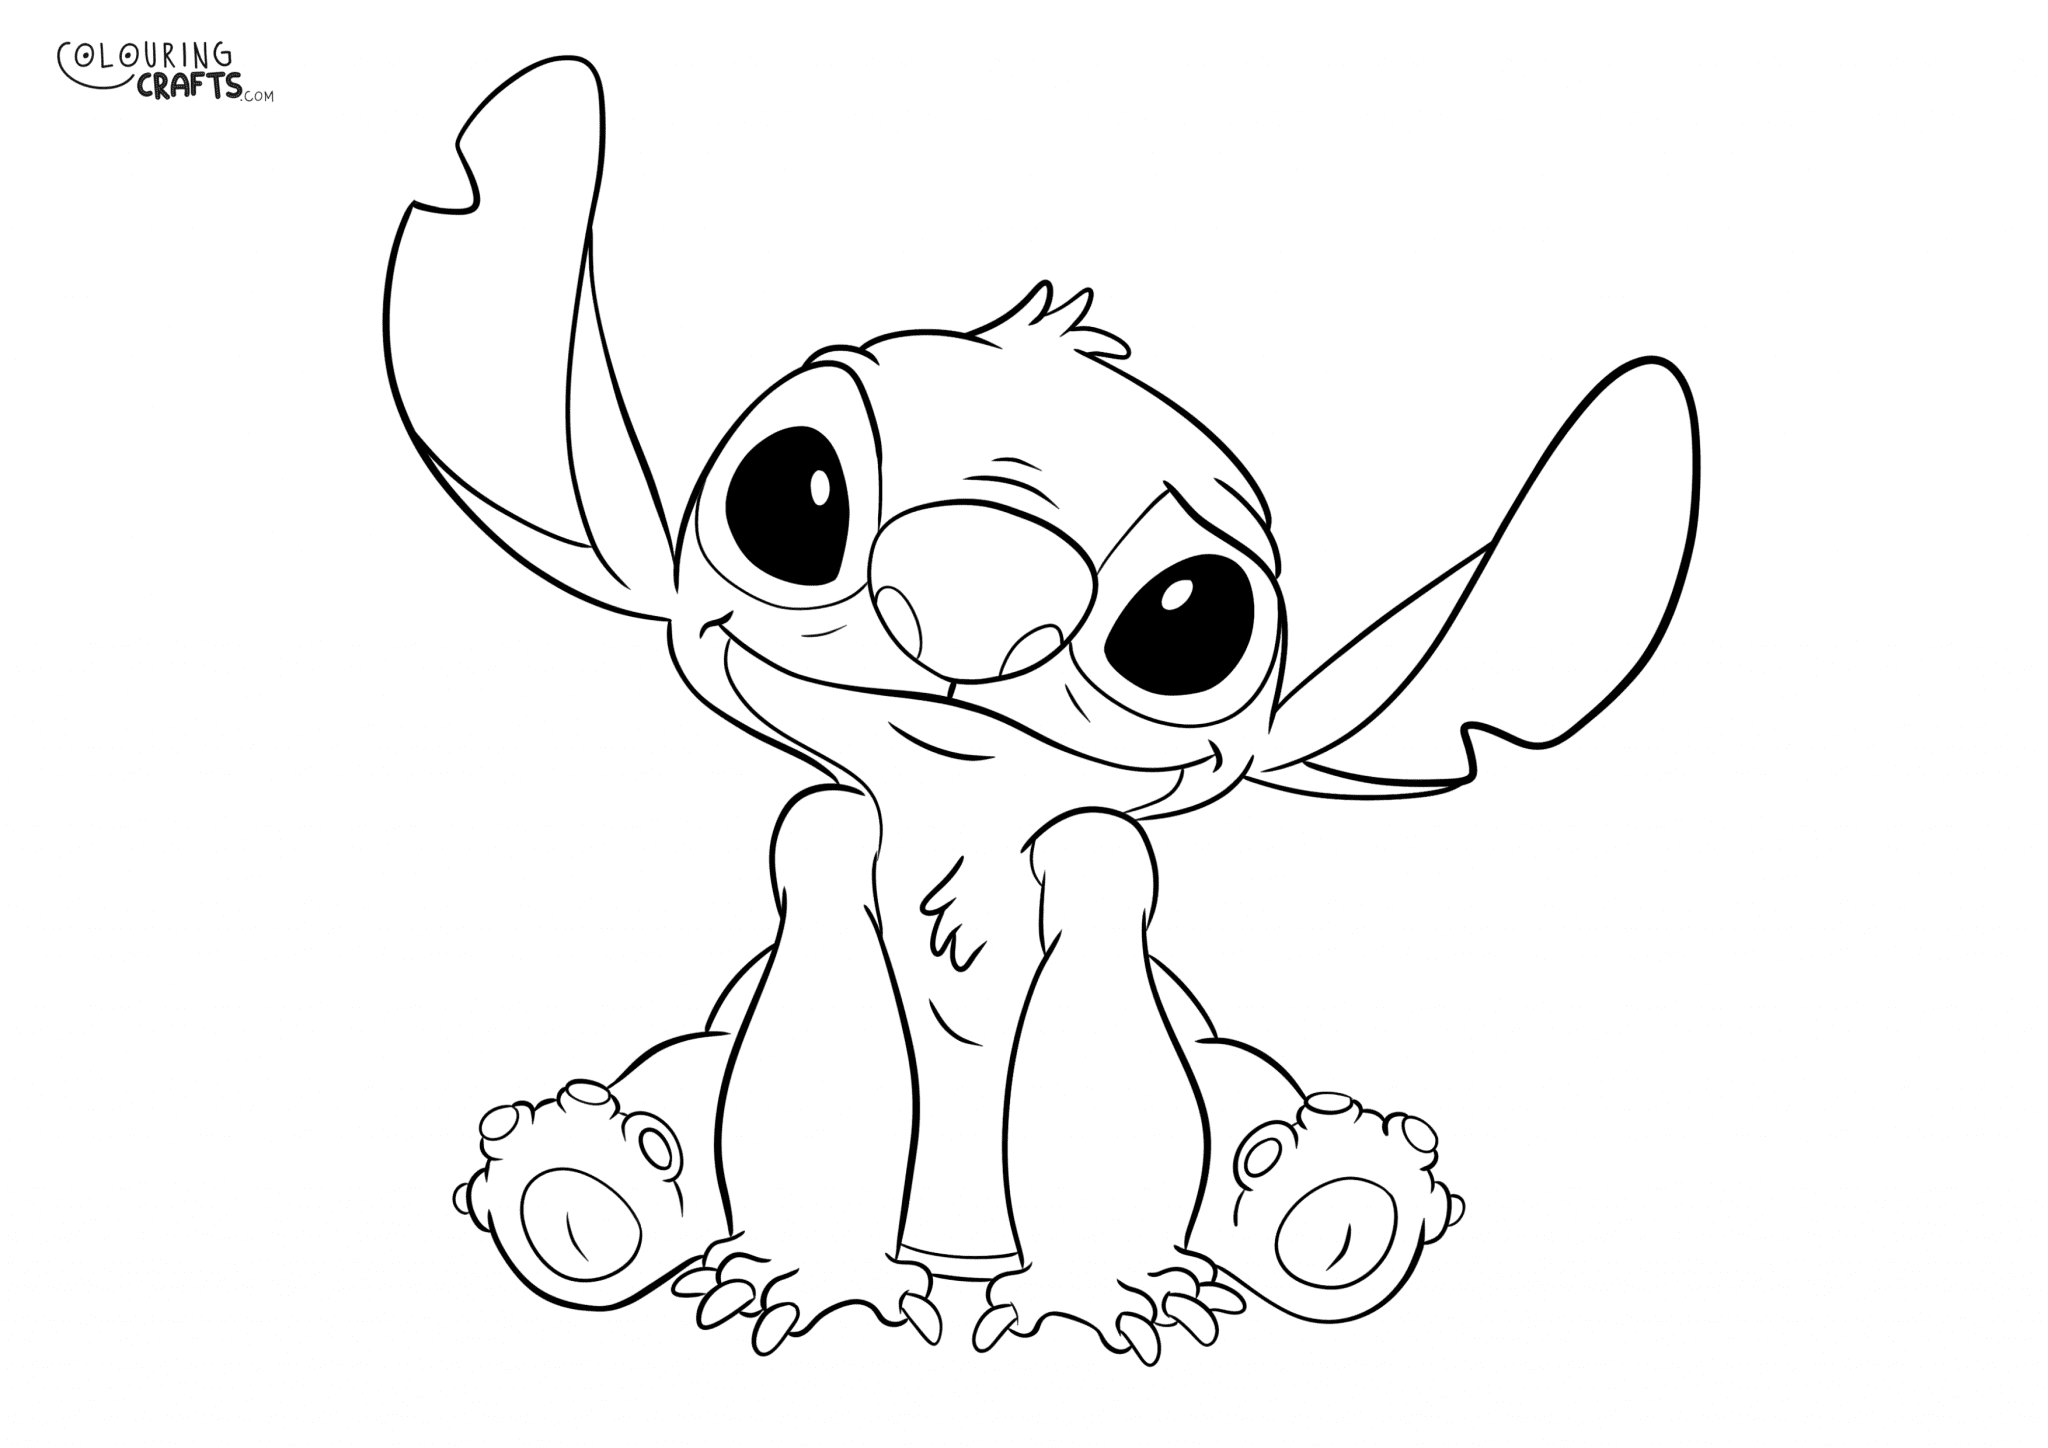 Stitch Colouring Page 1 - Colouring Crafts